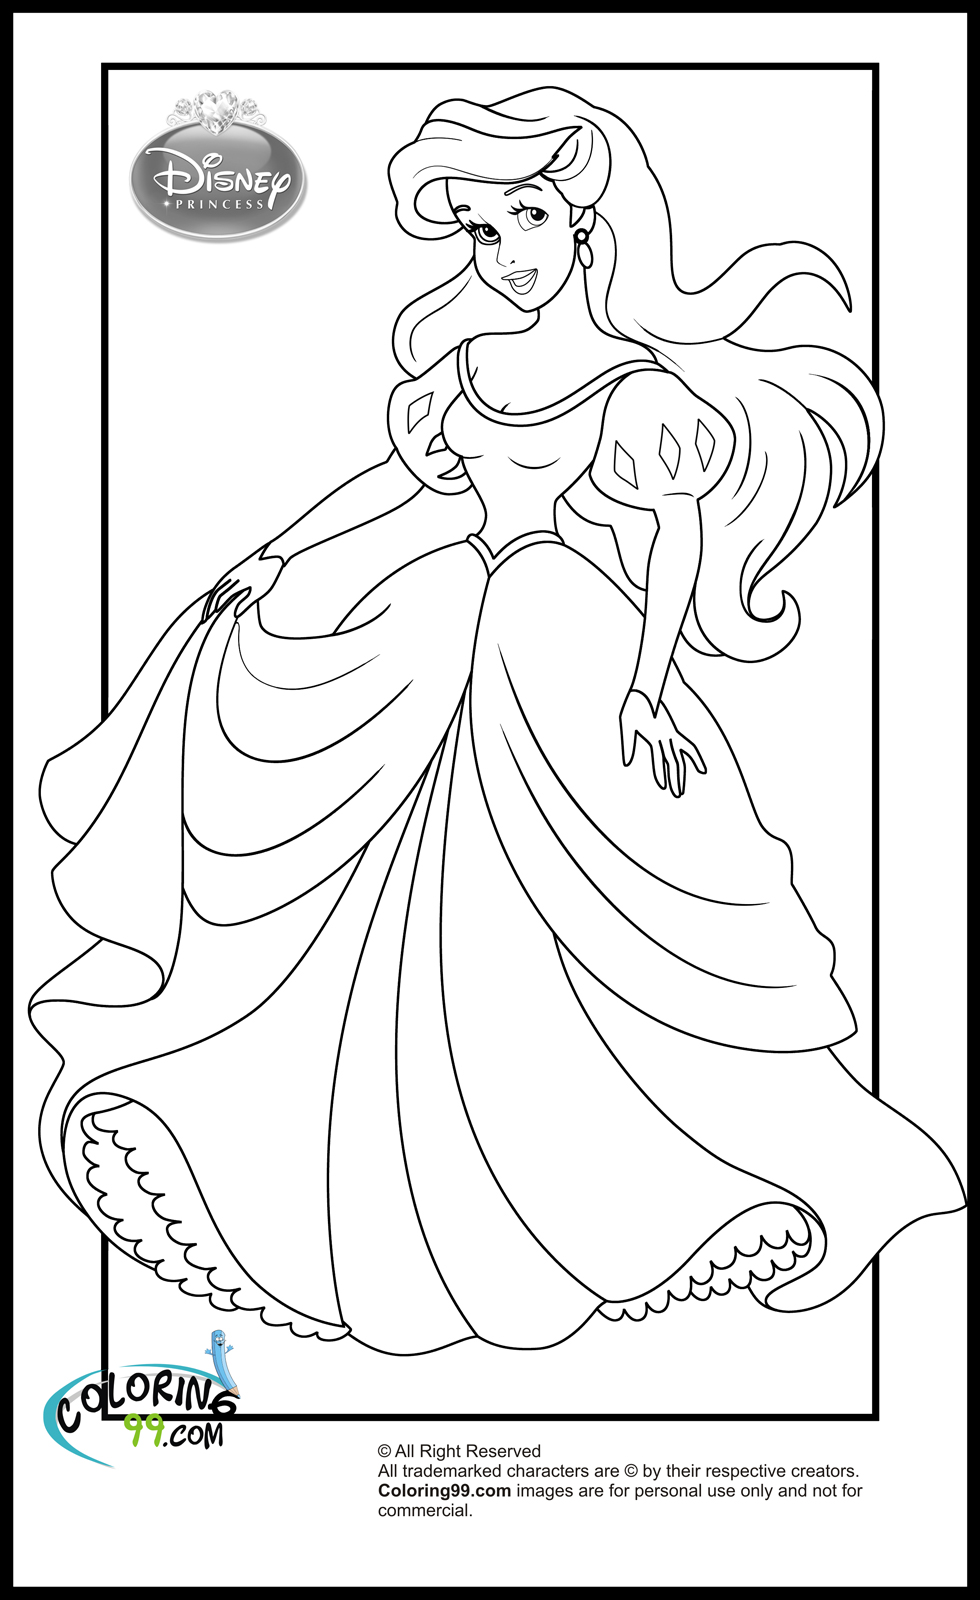 Download Disney Princess Coloring Pages | Minister Coloring